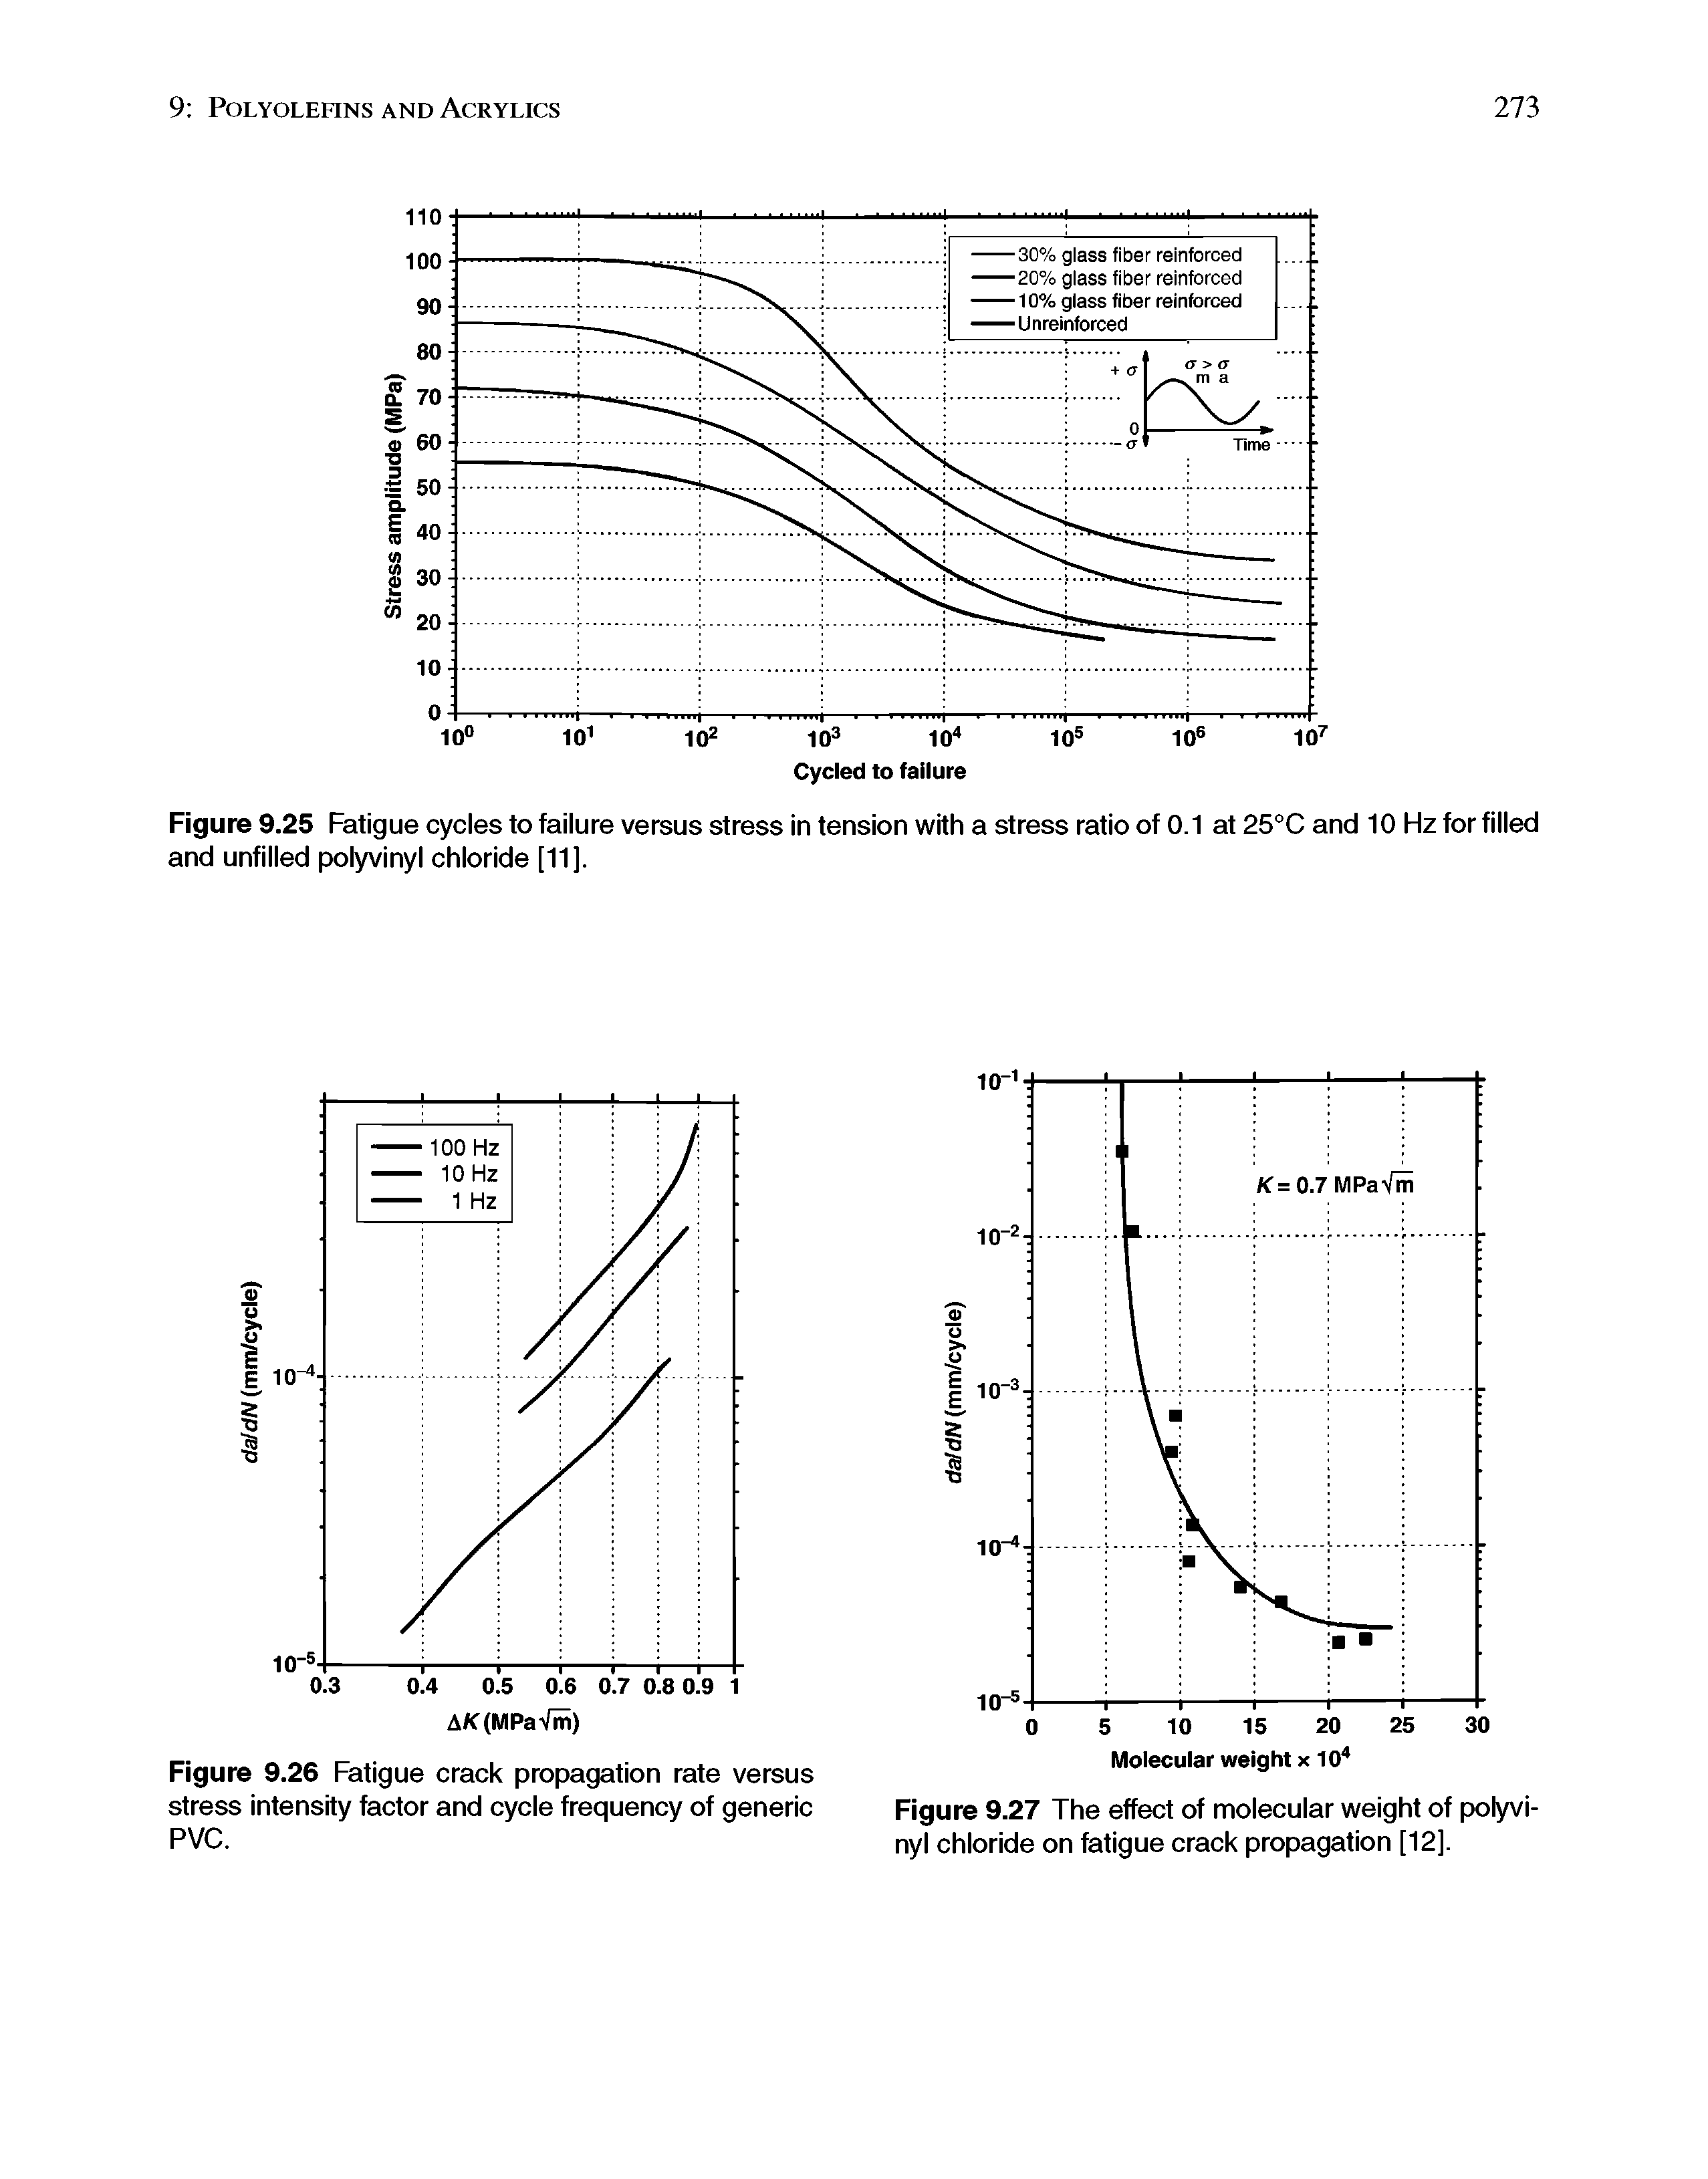 Figure 9.25 Fatigue cycles to failure versus stress in tension with a stress ratio of 0.1 at 25°C and 10 Hz for filled and unfilled polyvinyl chloride [11].